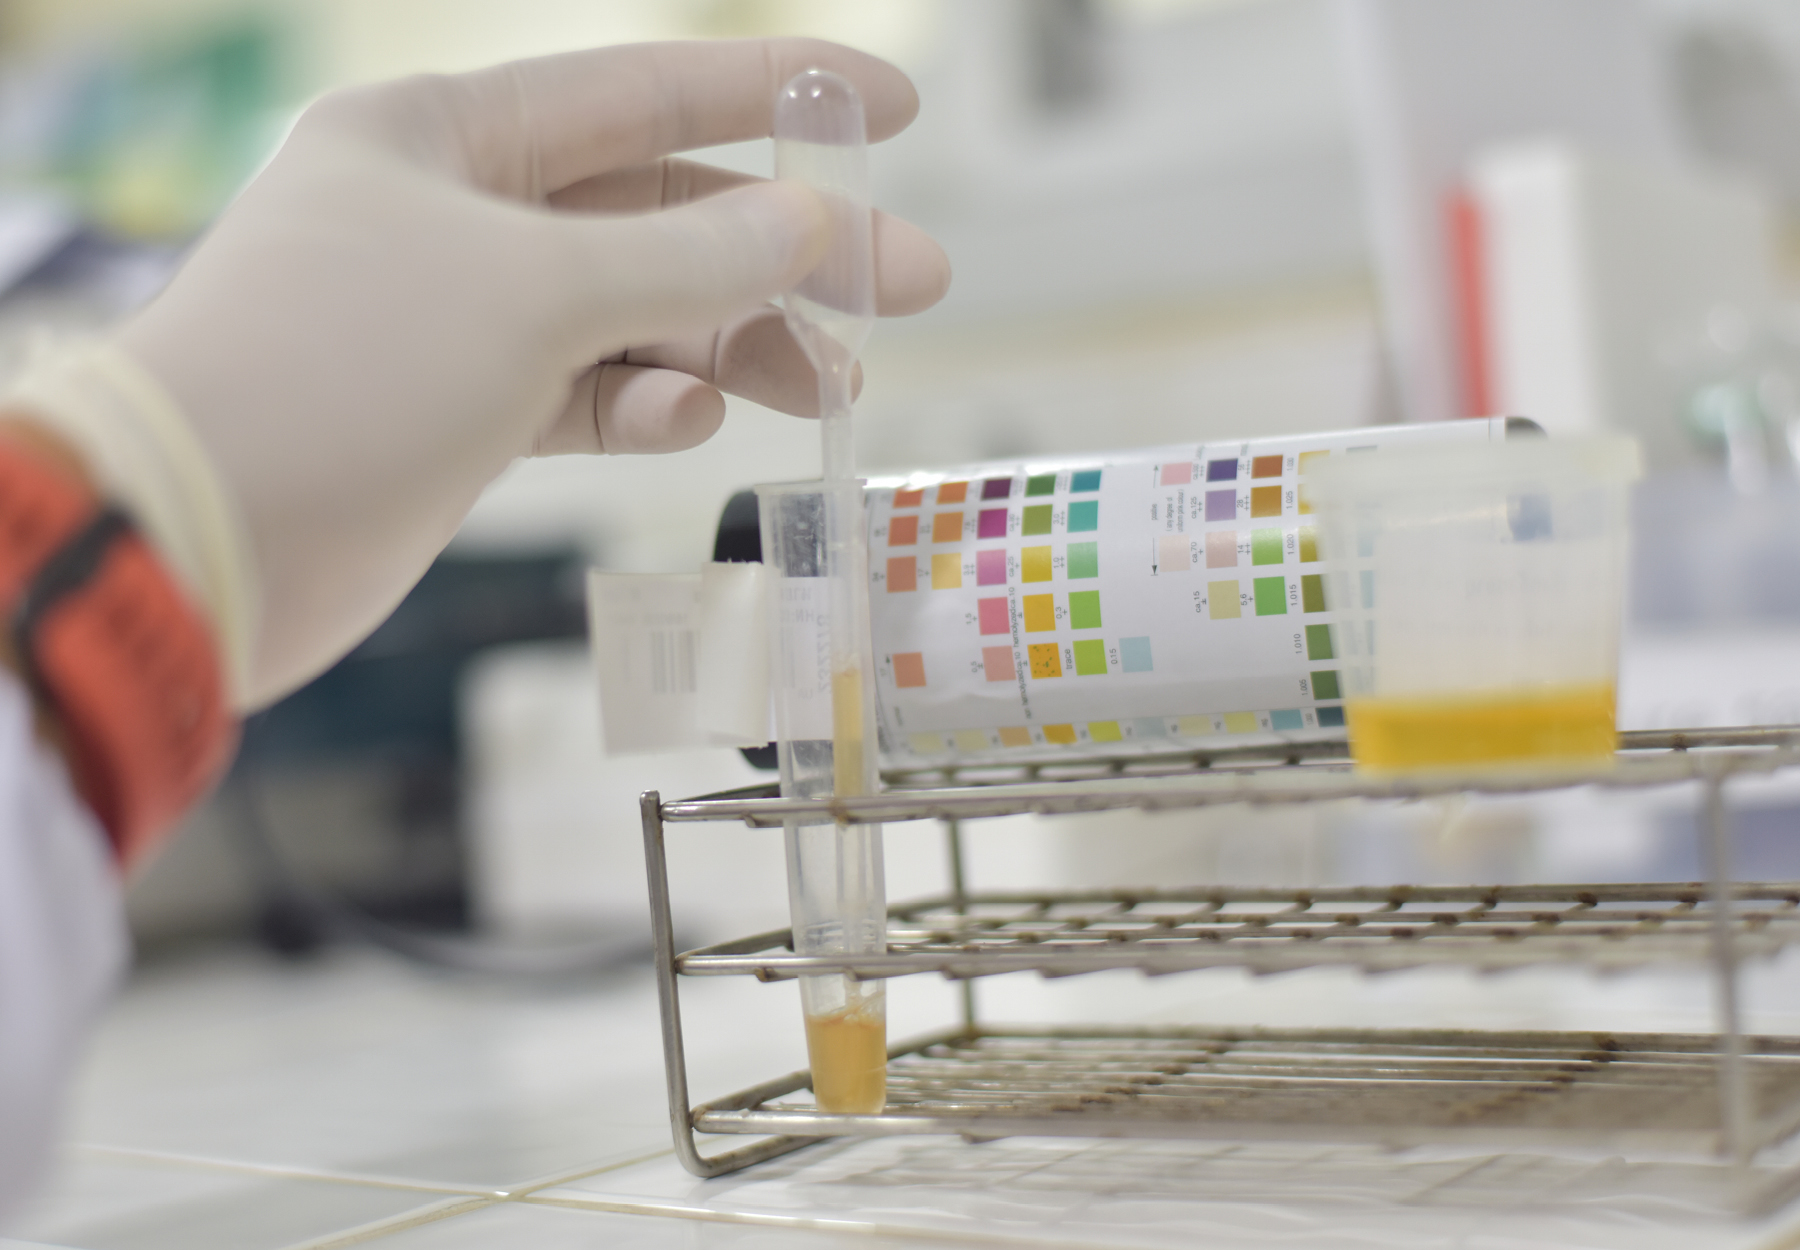 A closeup of the gloved hand of a lab professional doing urinalysis in the lab with a test tube and sample cup of urine and multi-colored indicator strips. iStock image.